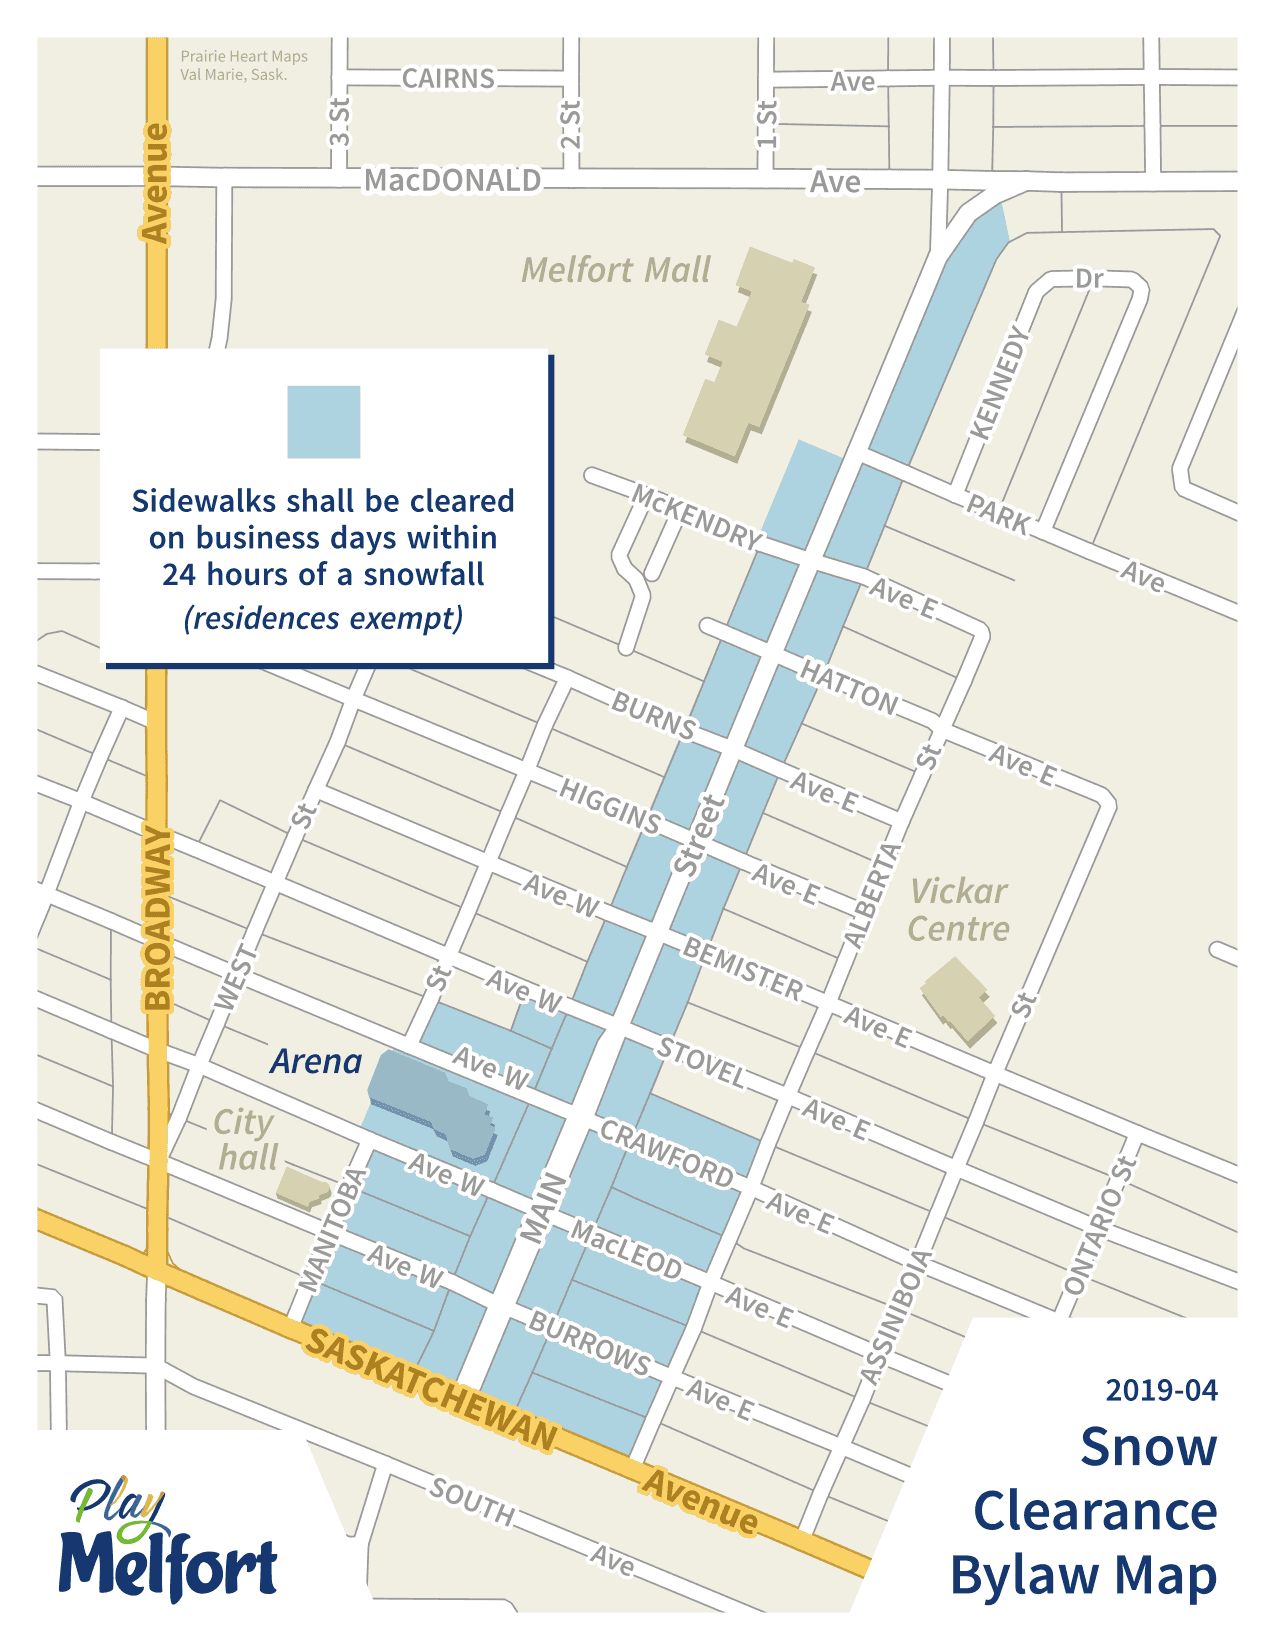 A map illustrating the City of Melfort's snow clearance bylaw.